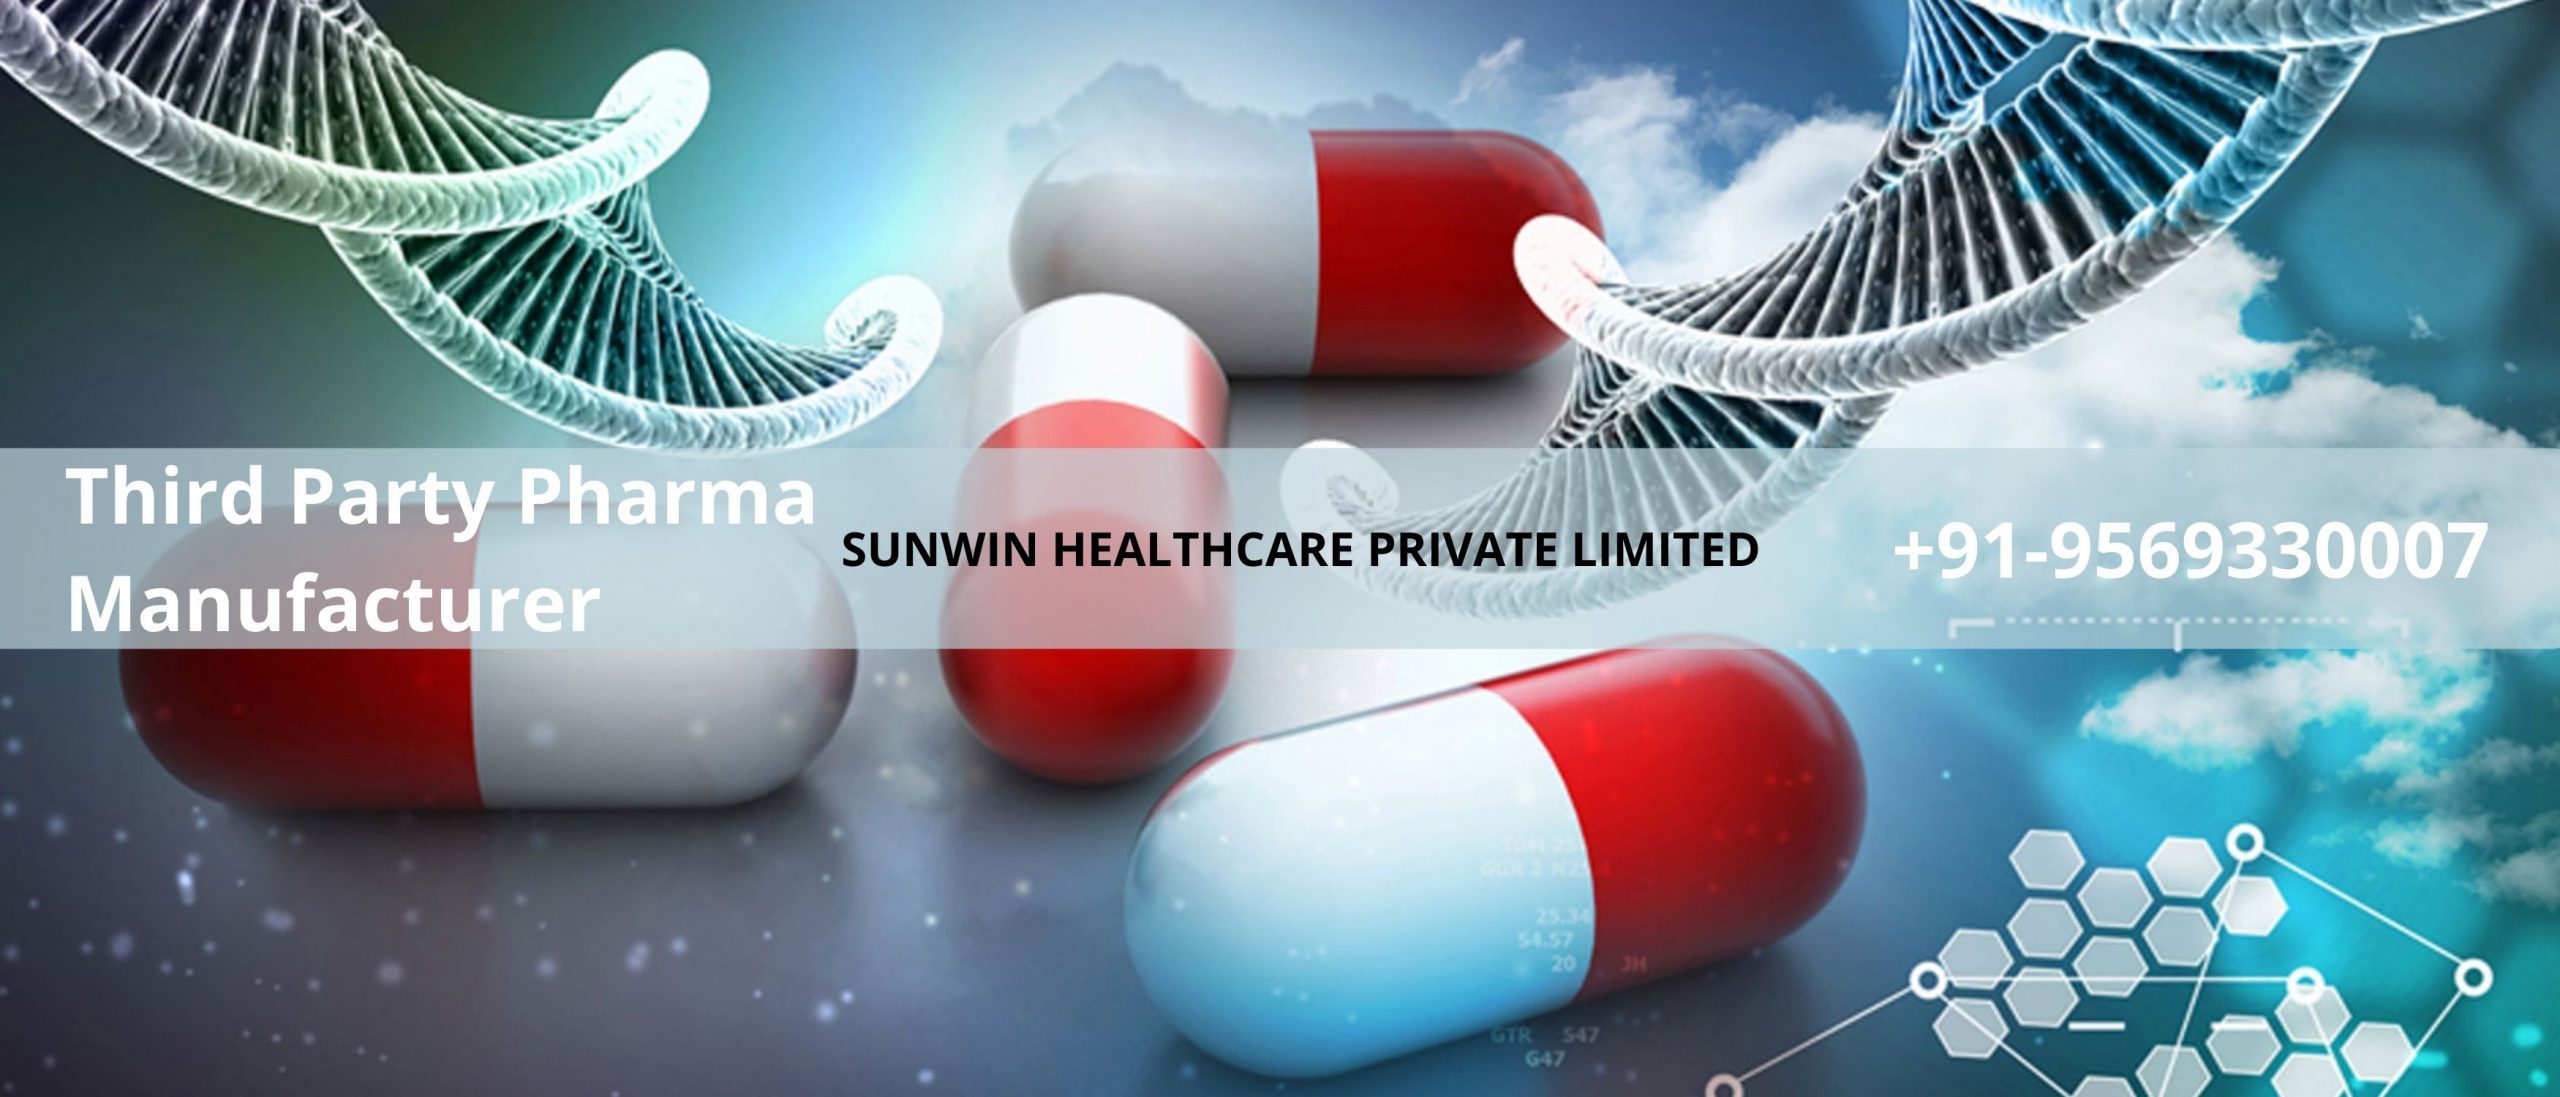 Top Third Party Pharma Manufacturers In India